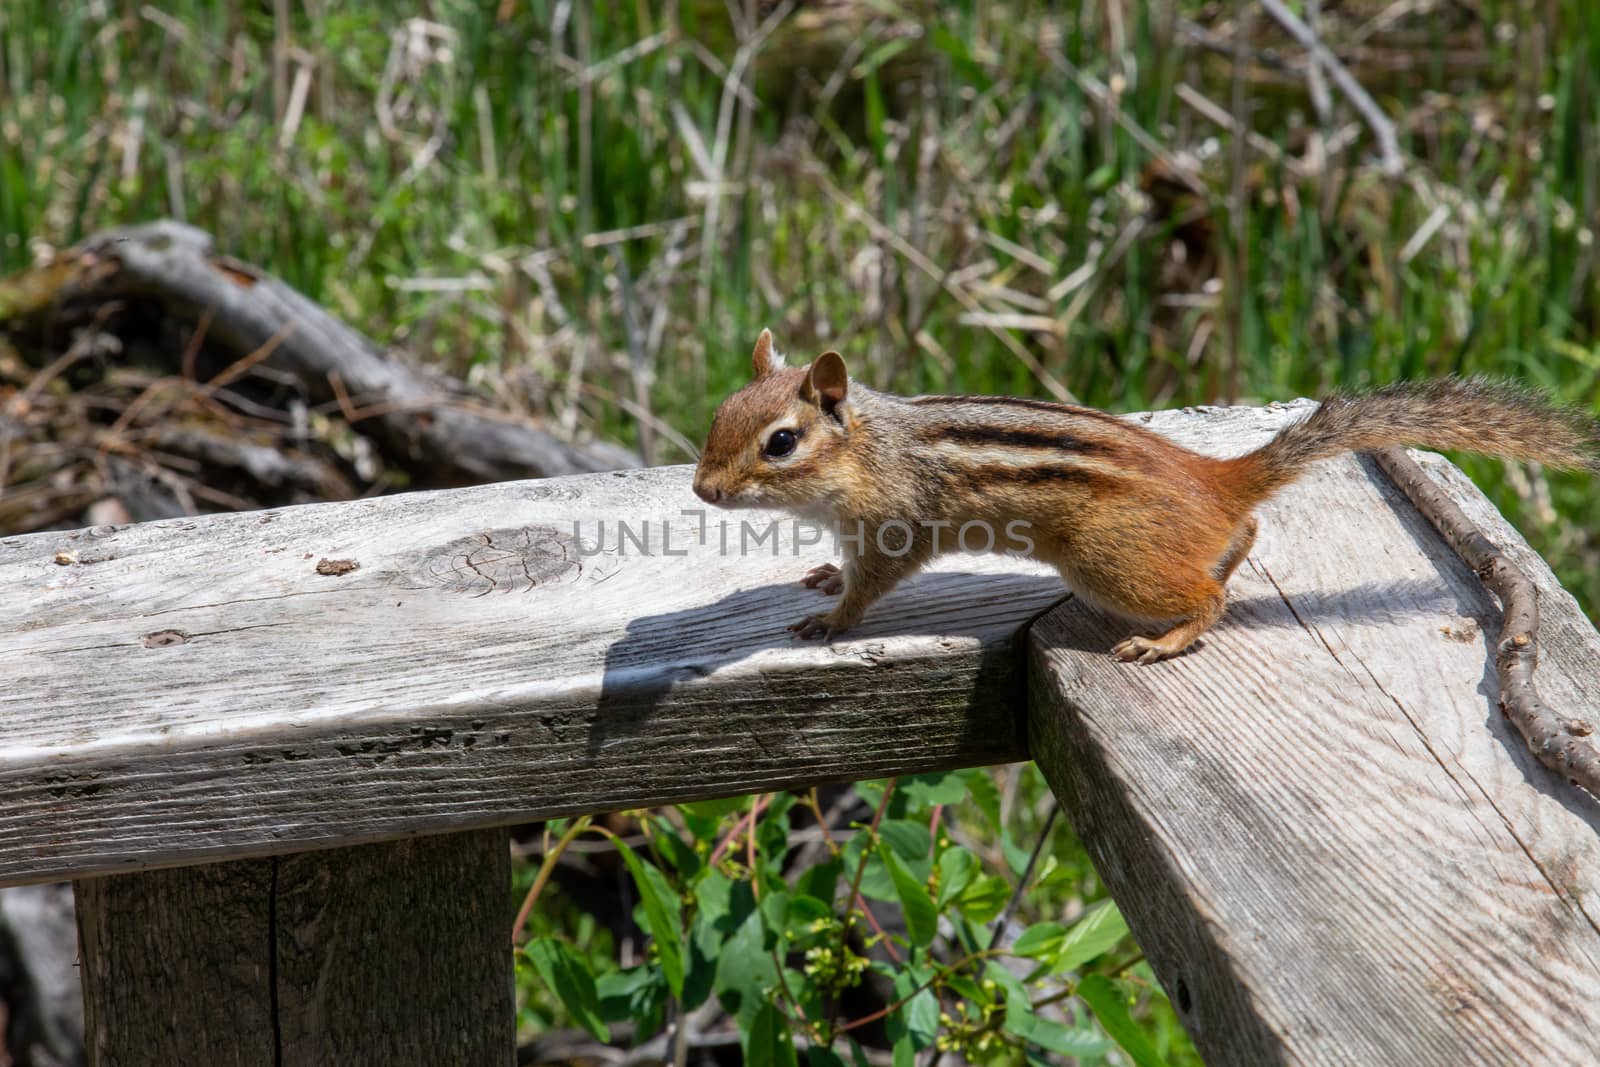 A Chipmunk in the Sun by colintemple